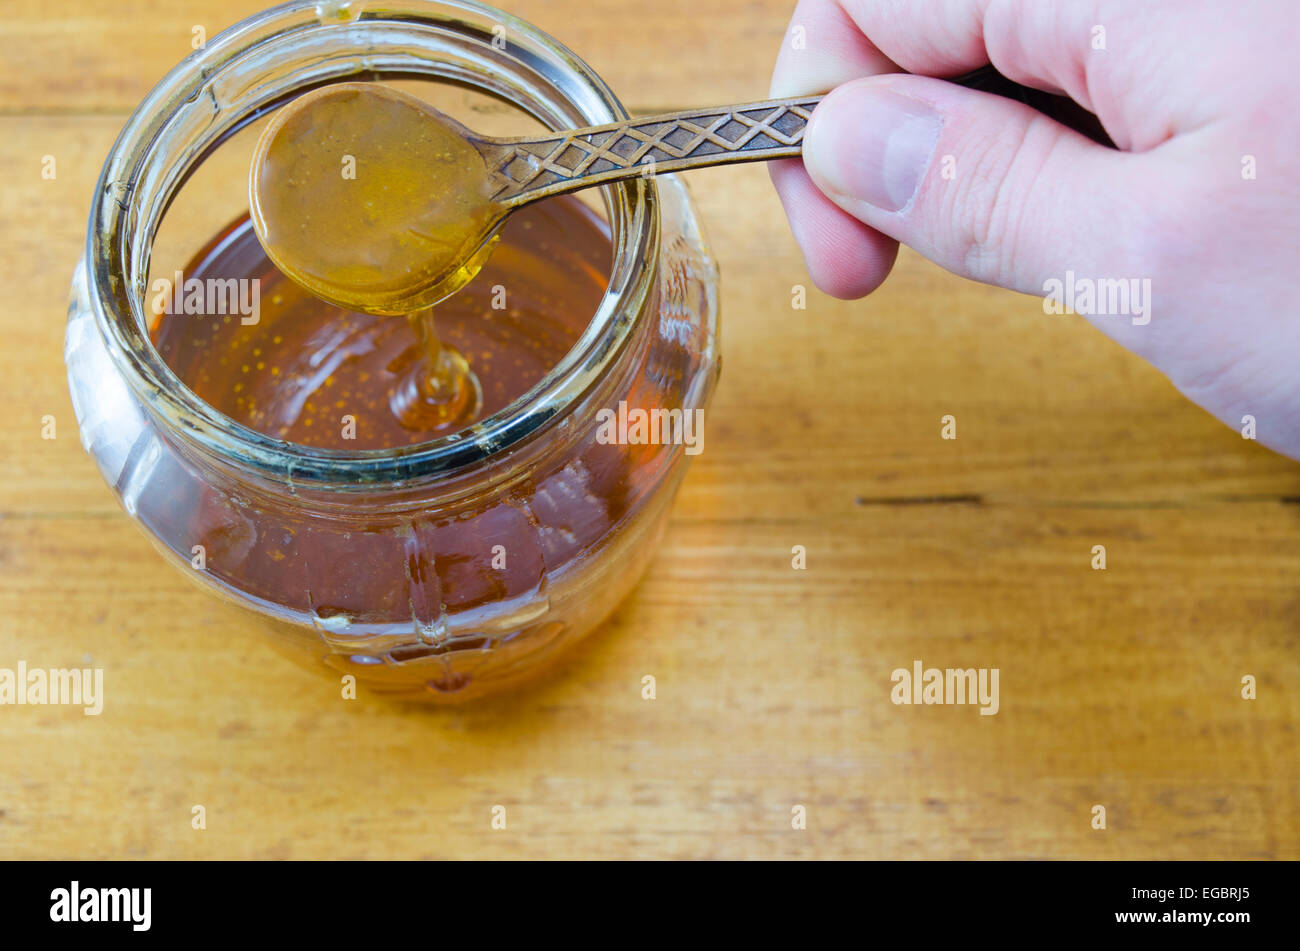 Hand holding a wooden spoon of honey dripping into the jar Stock Photo